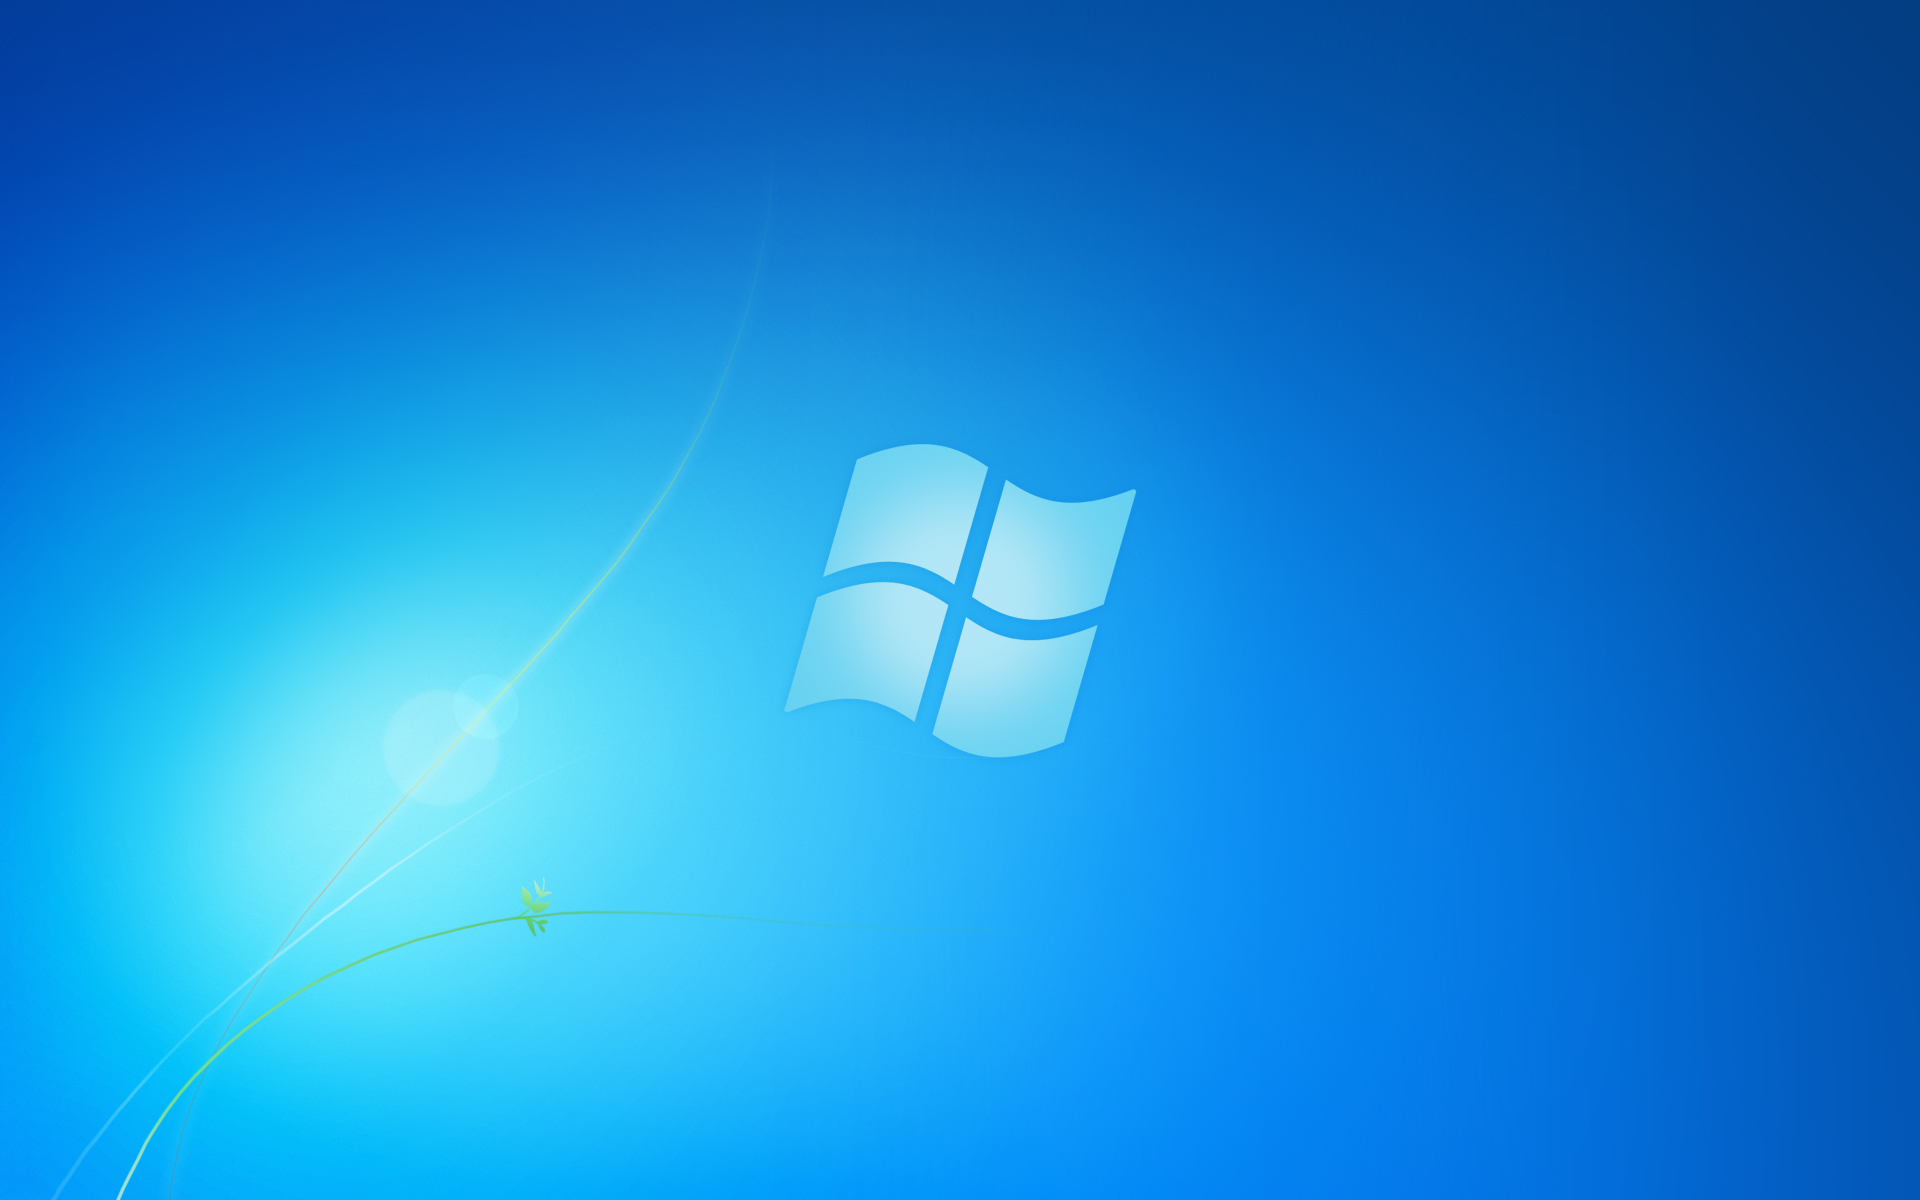 Windows XP: Editions, Service Packs, Support, More